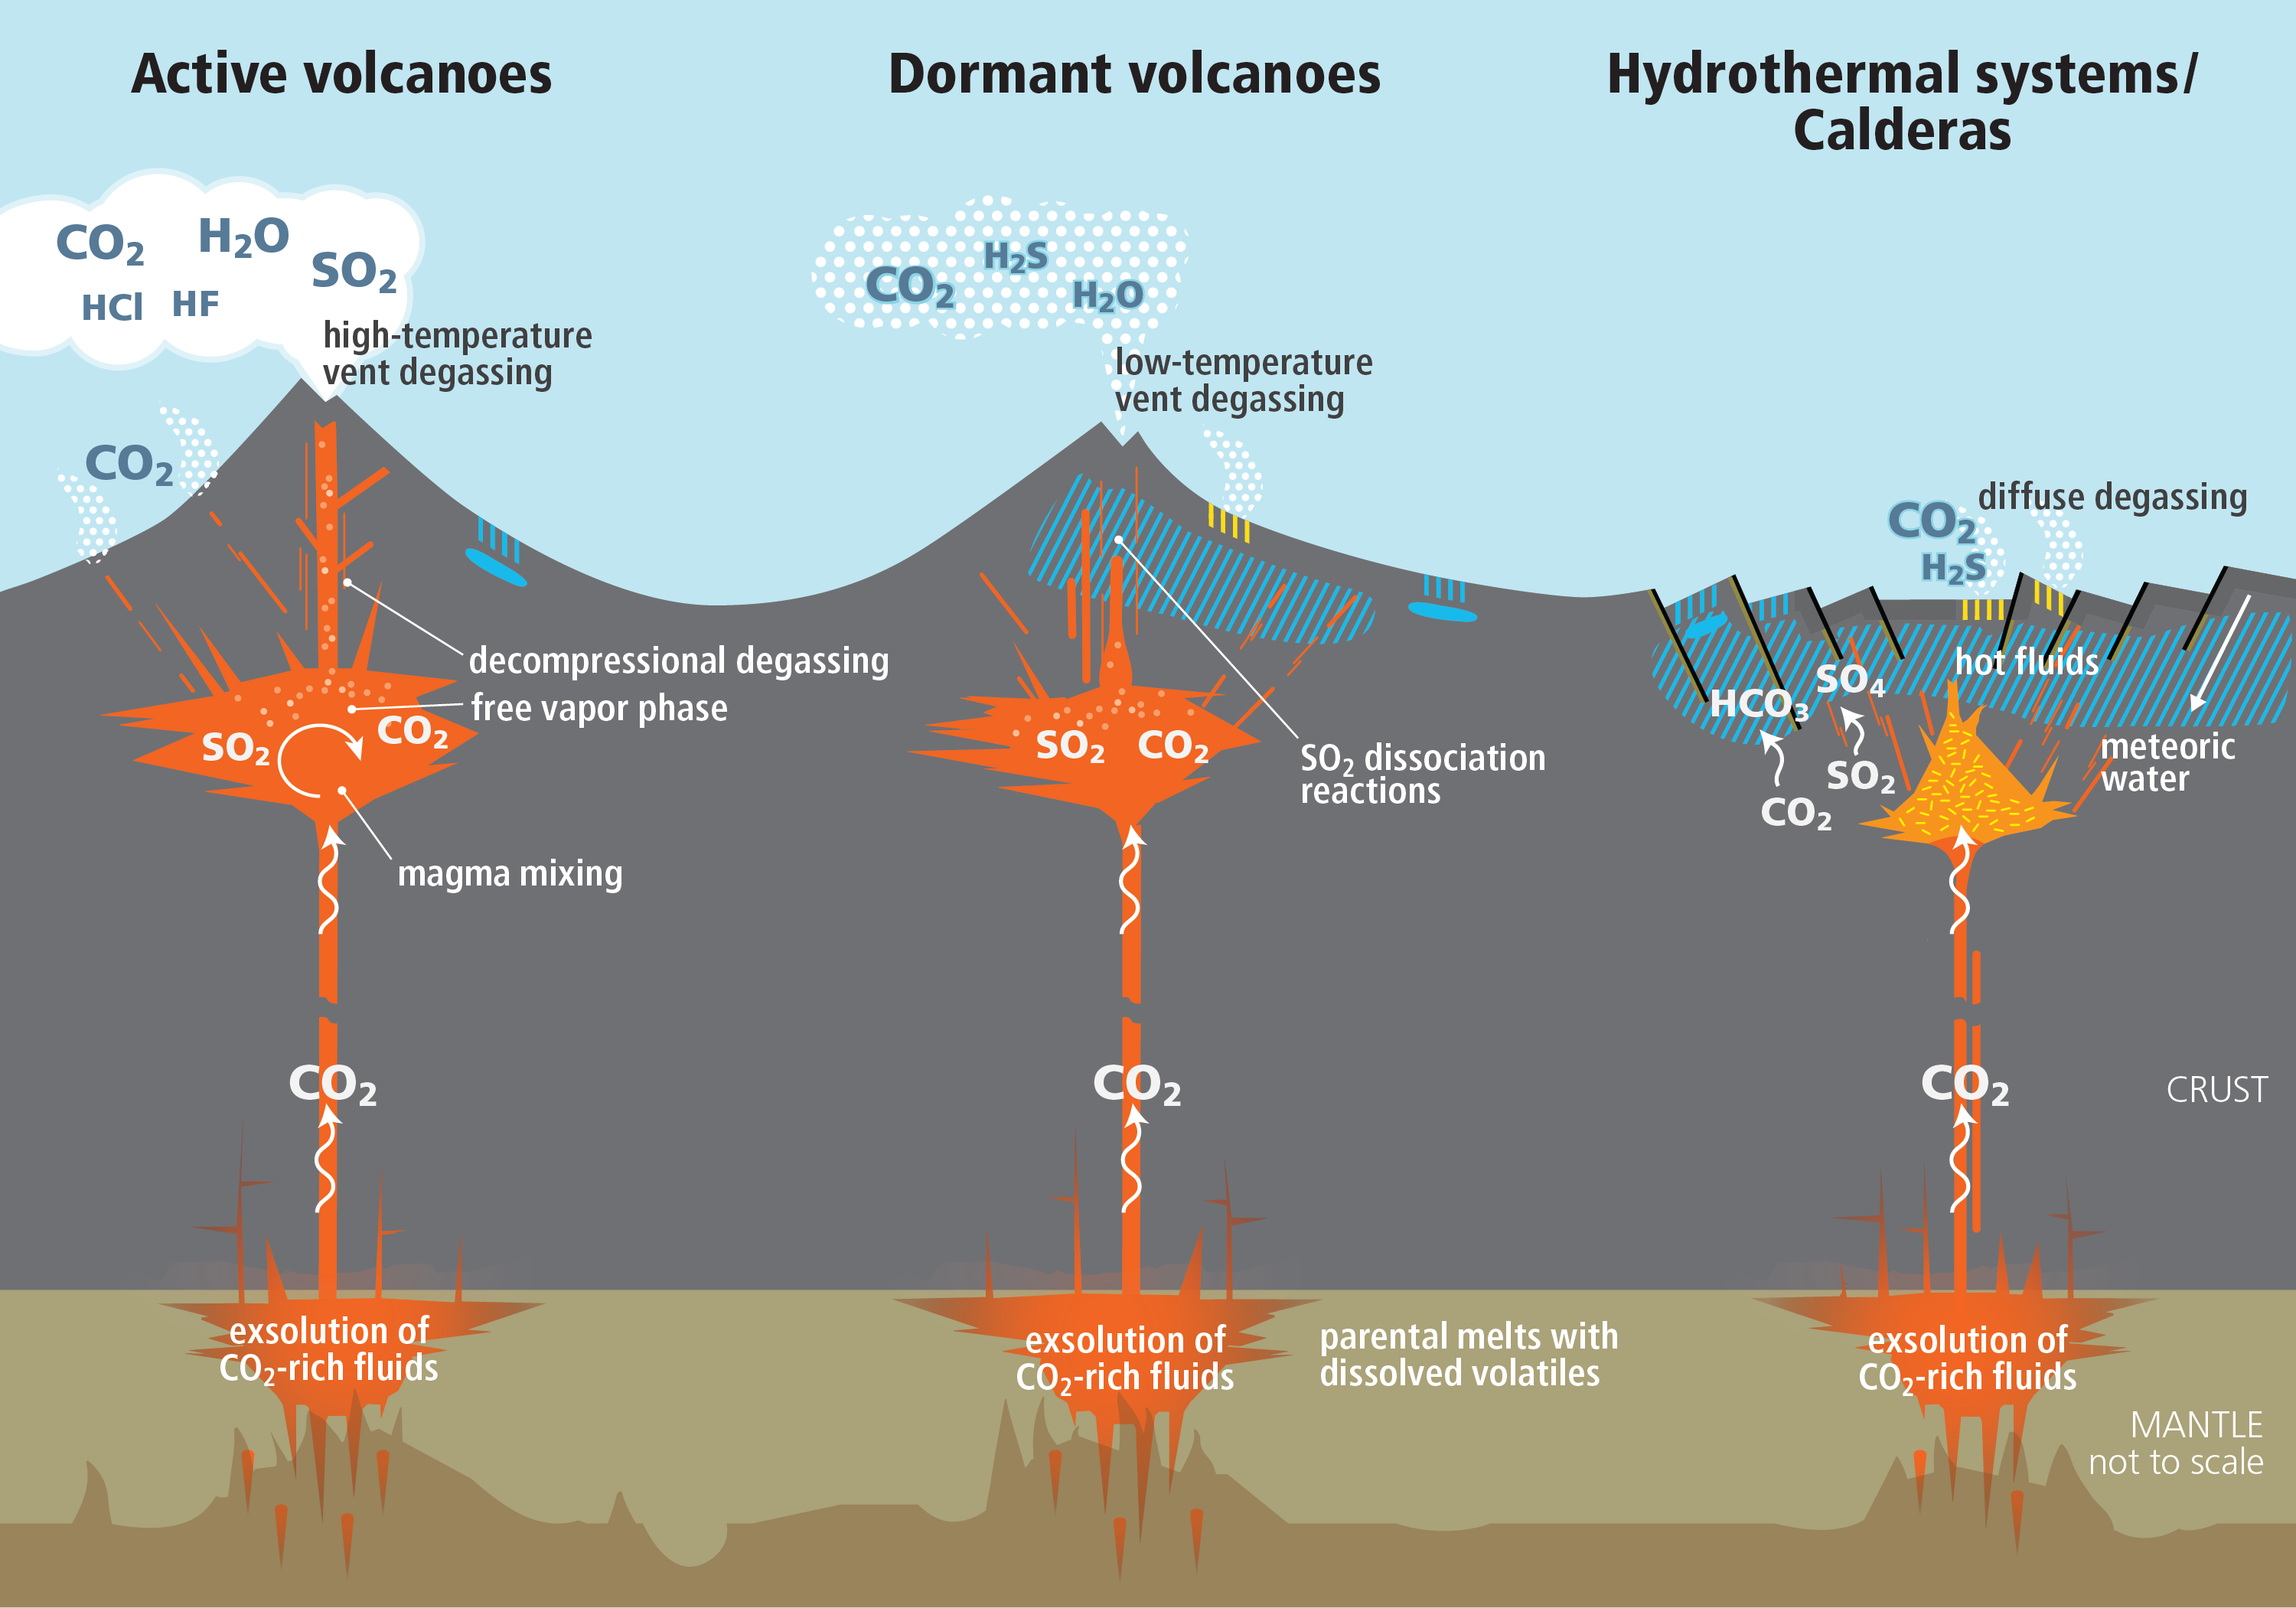 CO2 emission patterns from volcanic and magmatic systems